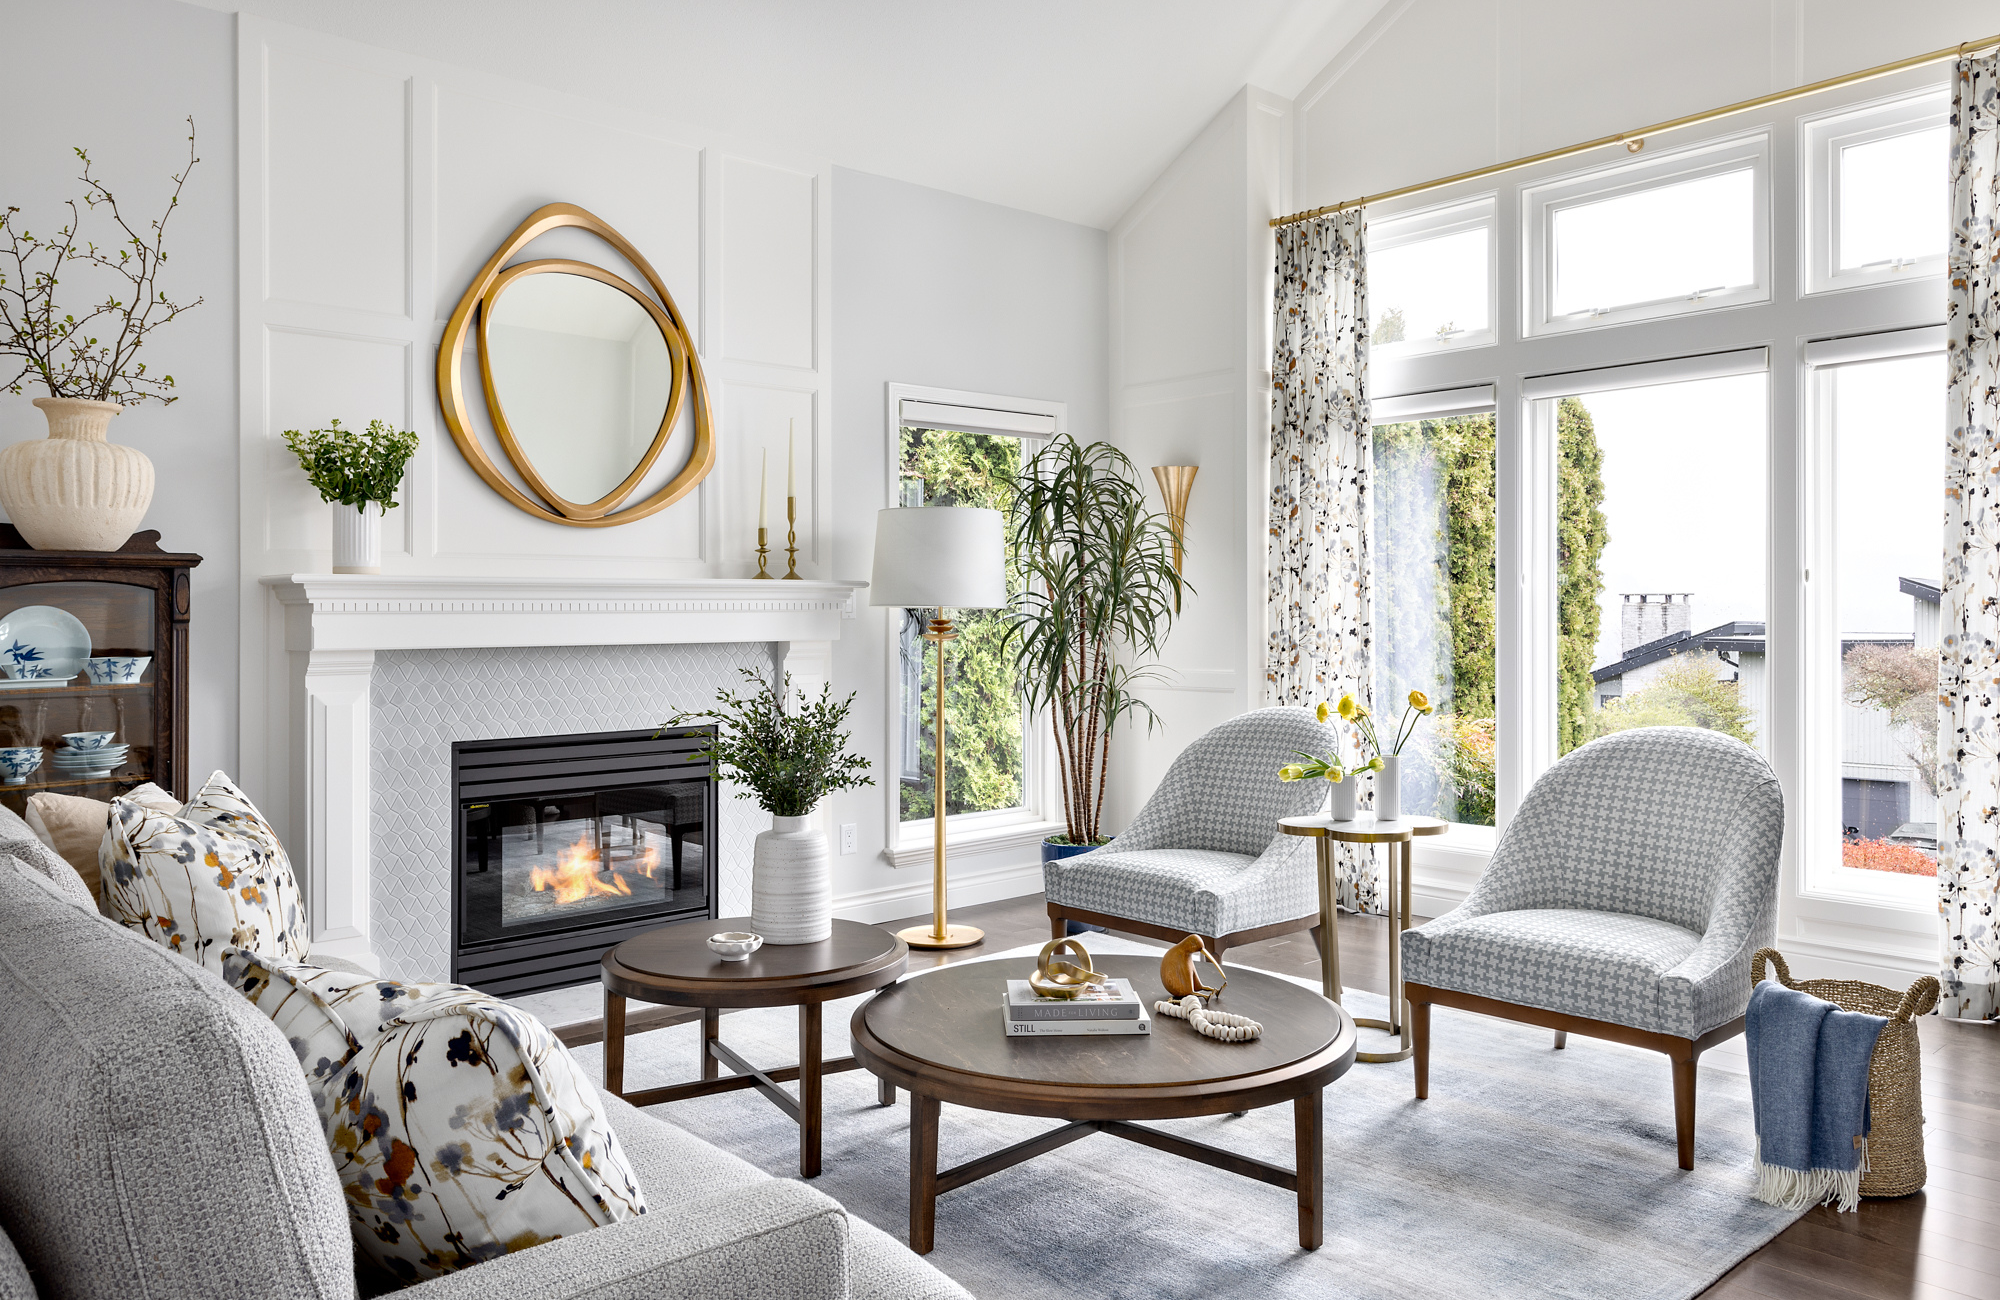 simply-home-decorating-lori-steeves-north-vancouver-interior-designer-transitional-fresh-living-room-timeless-furnishings